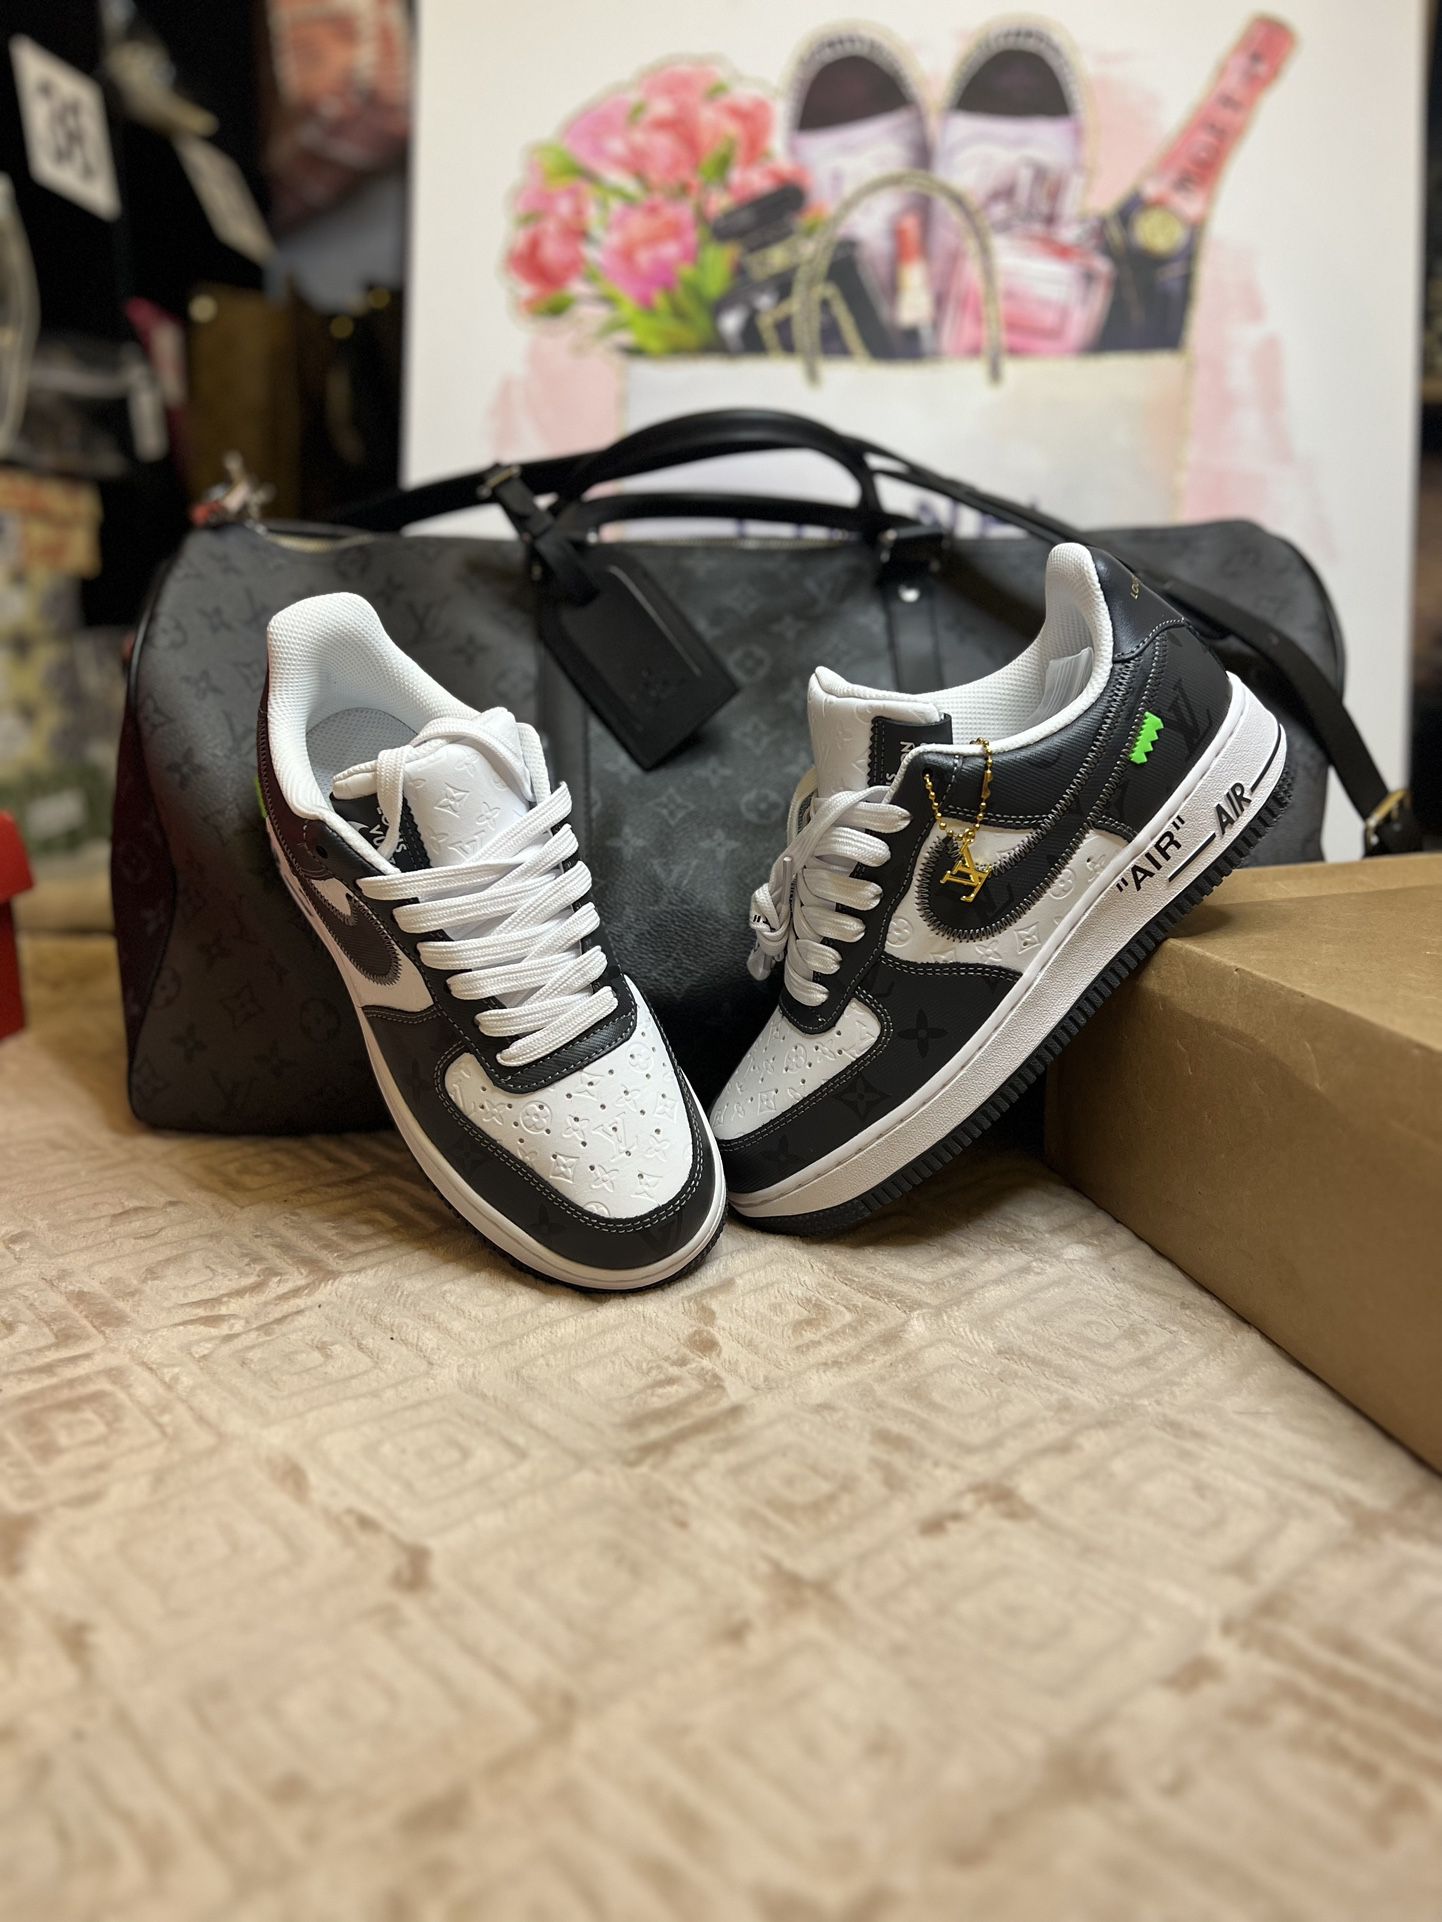 BRAND NEW LV AIR FORCES for Sale in San Antonio, TX - OfferUp